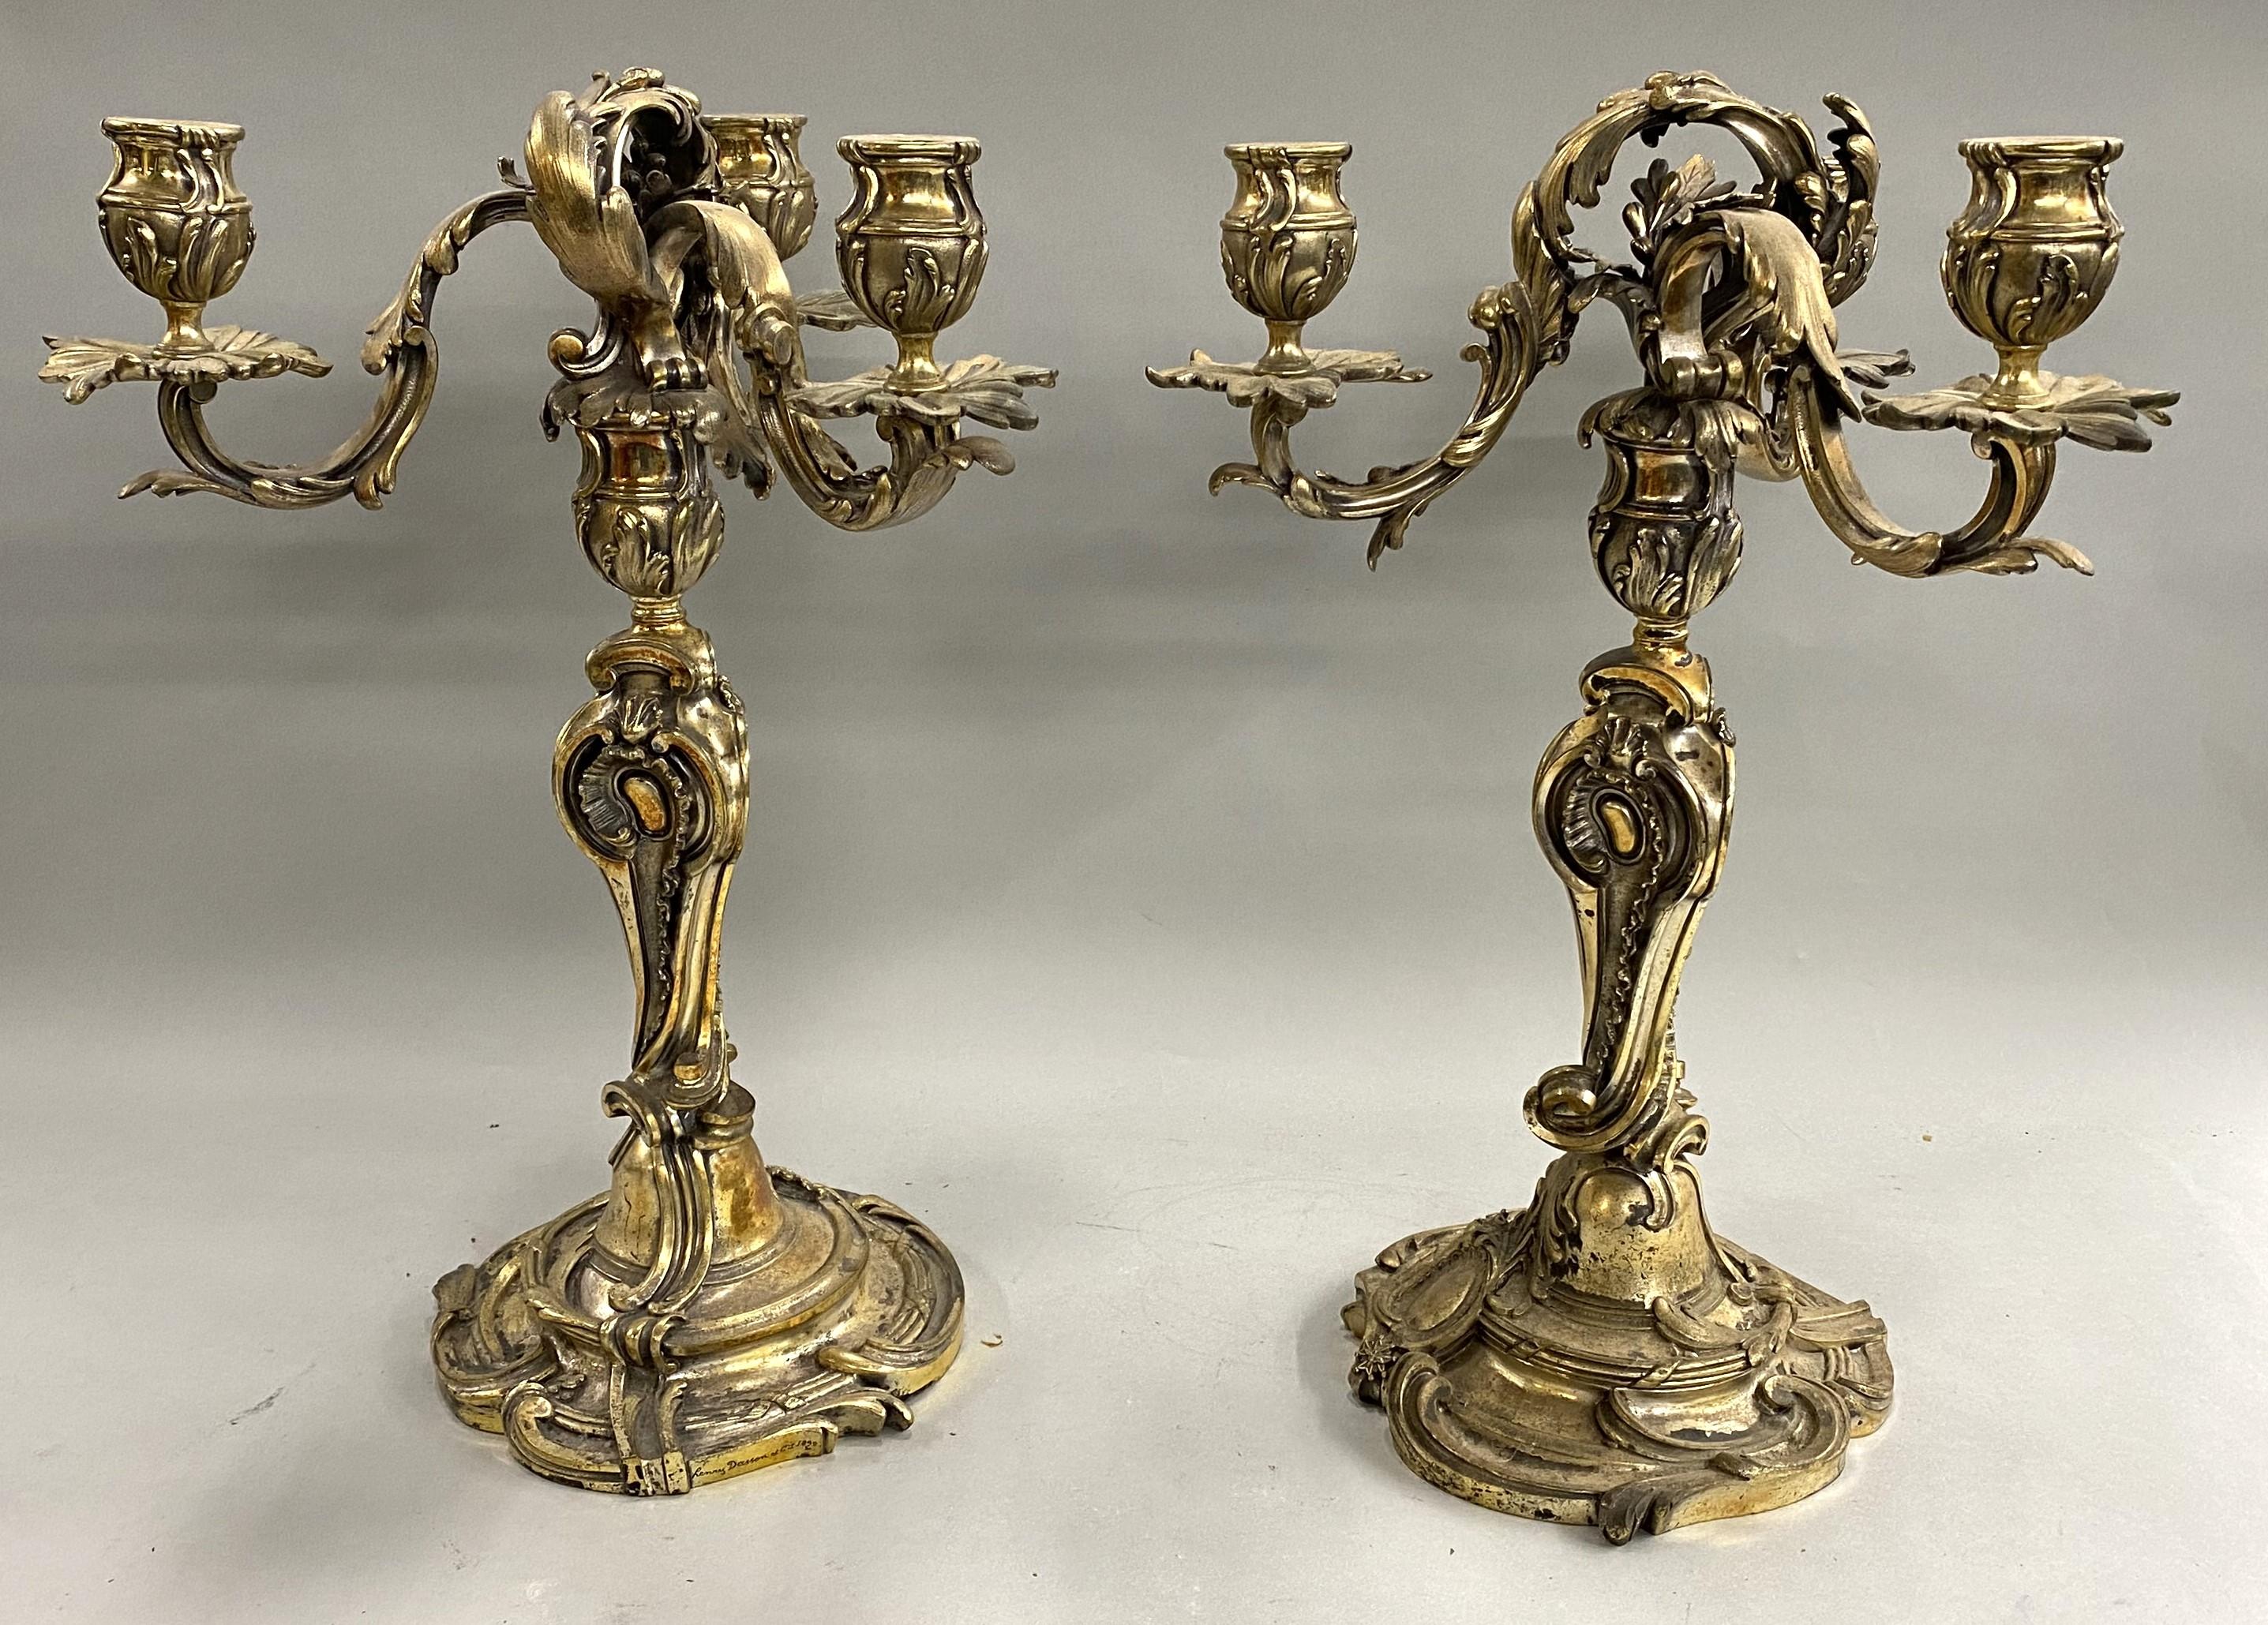 An impressive pair of French gilt bronze three-light candelabra in a foliate motif, signed “Henry Dasson et Cie 1892” on the base. Henry Dasson. Henry Dasson (c. 1825–1896) was a nineteenth century Parisian maker of gilt-bronze mounted furniture.